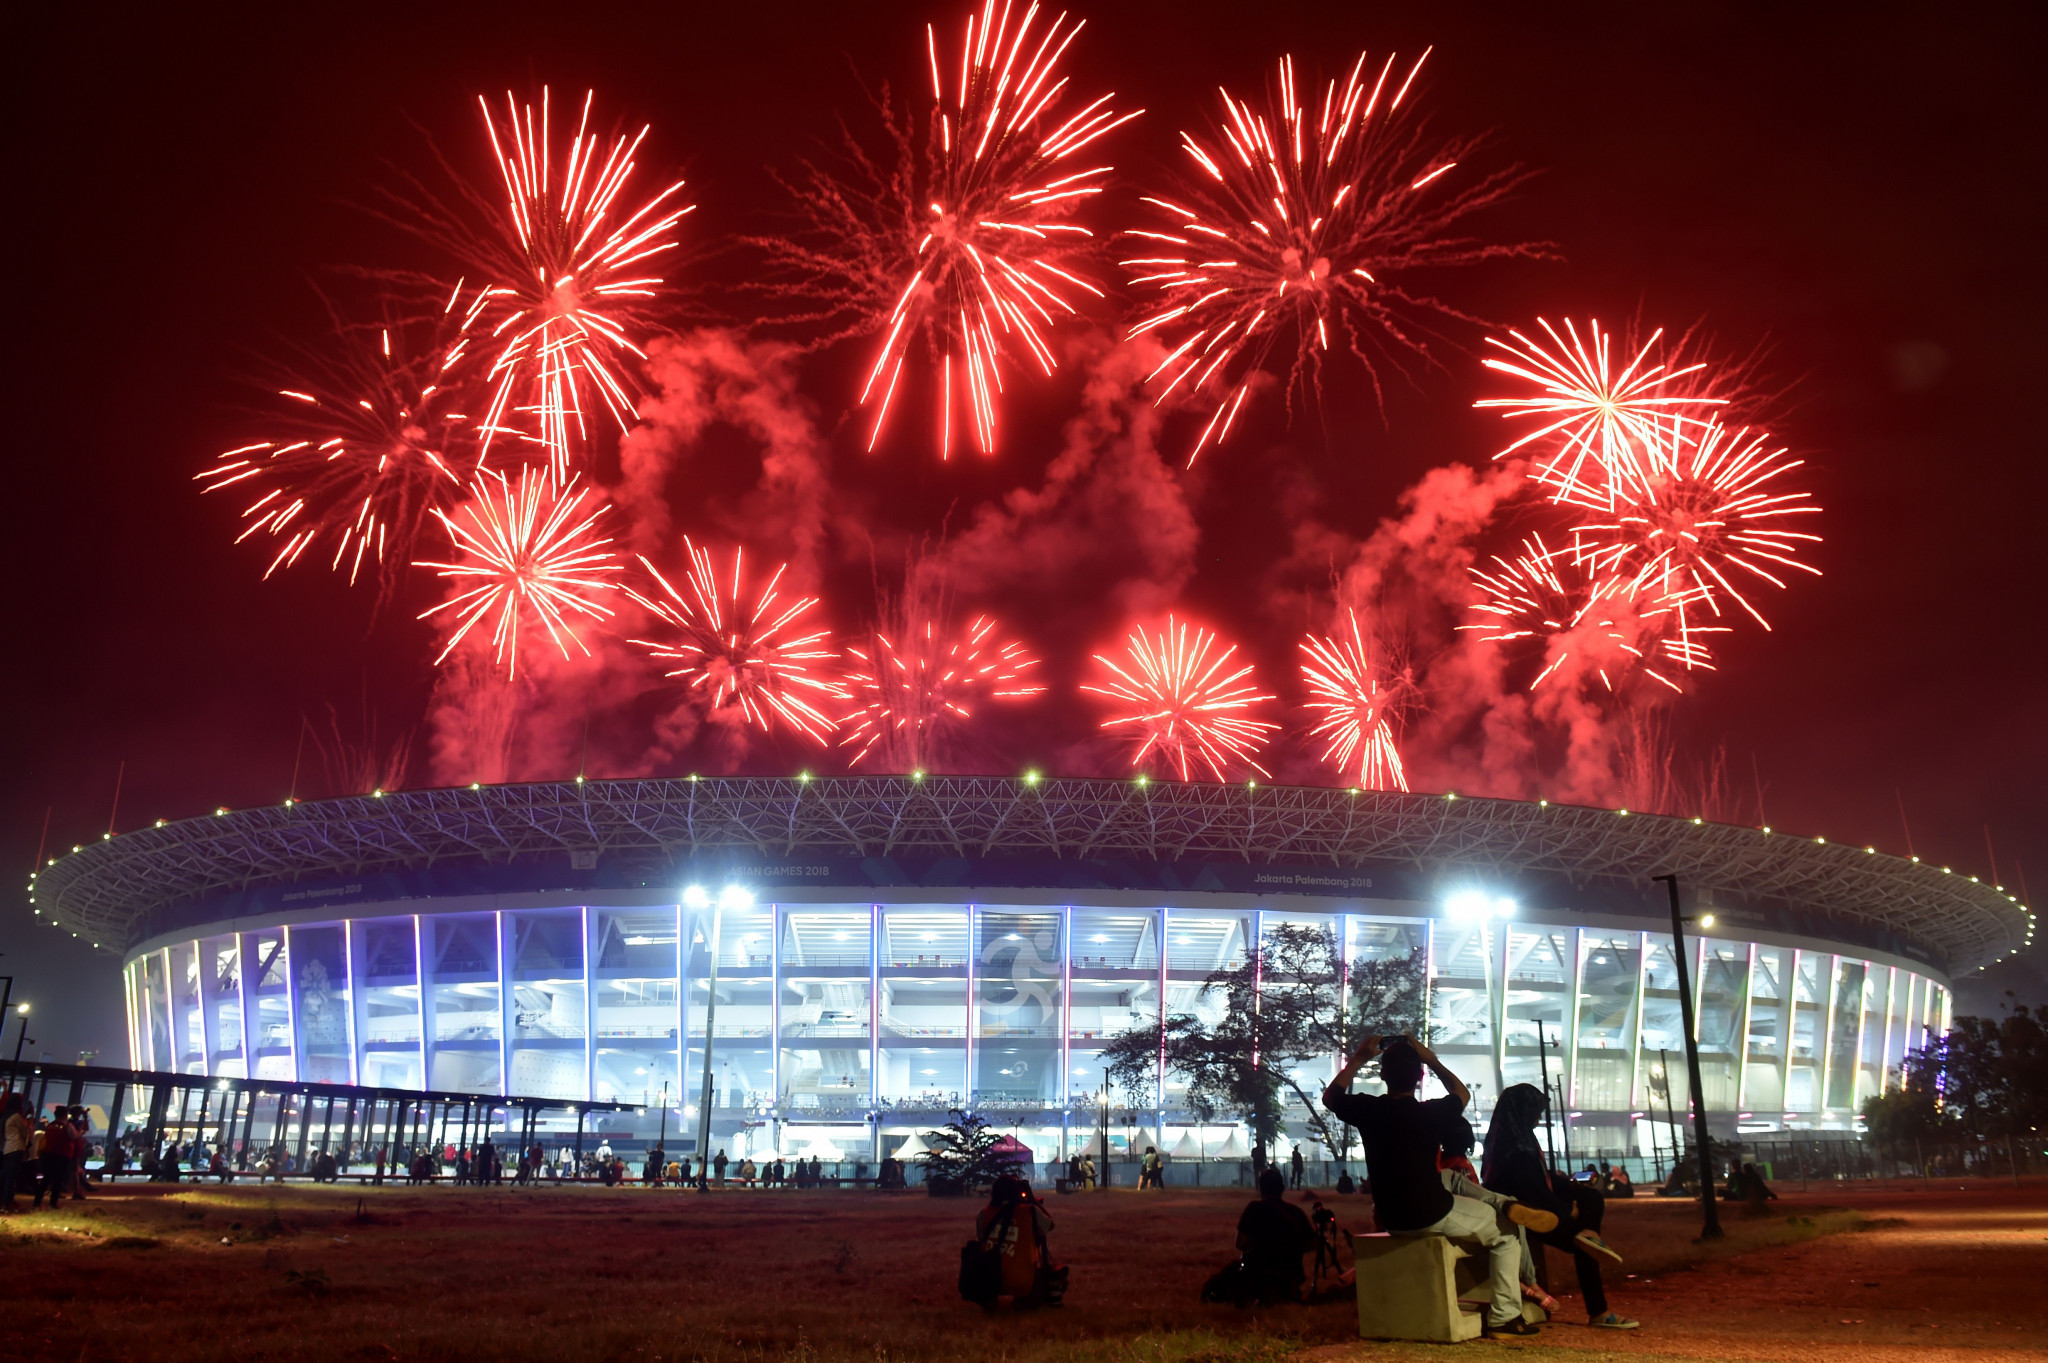 Fireworks explode over the Gelora Bung Karno main stadium in Jakarta during the Closing Ceremony of the 2018 Asian Games ©Getty Images